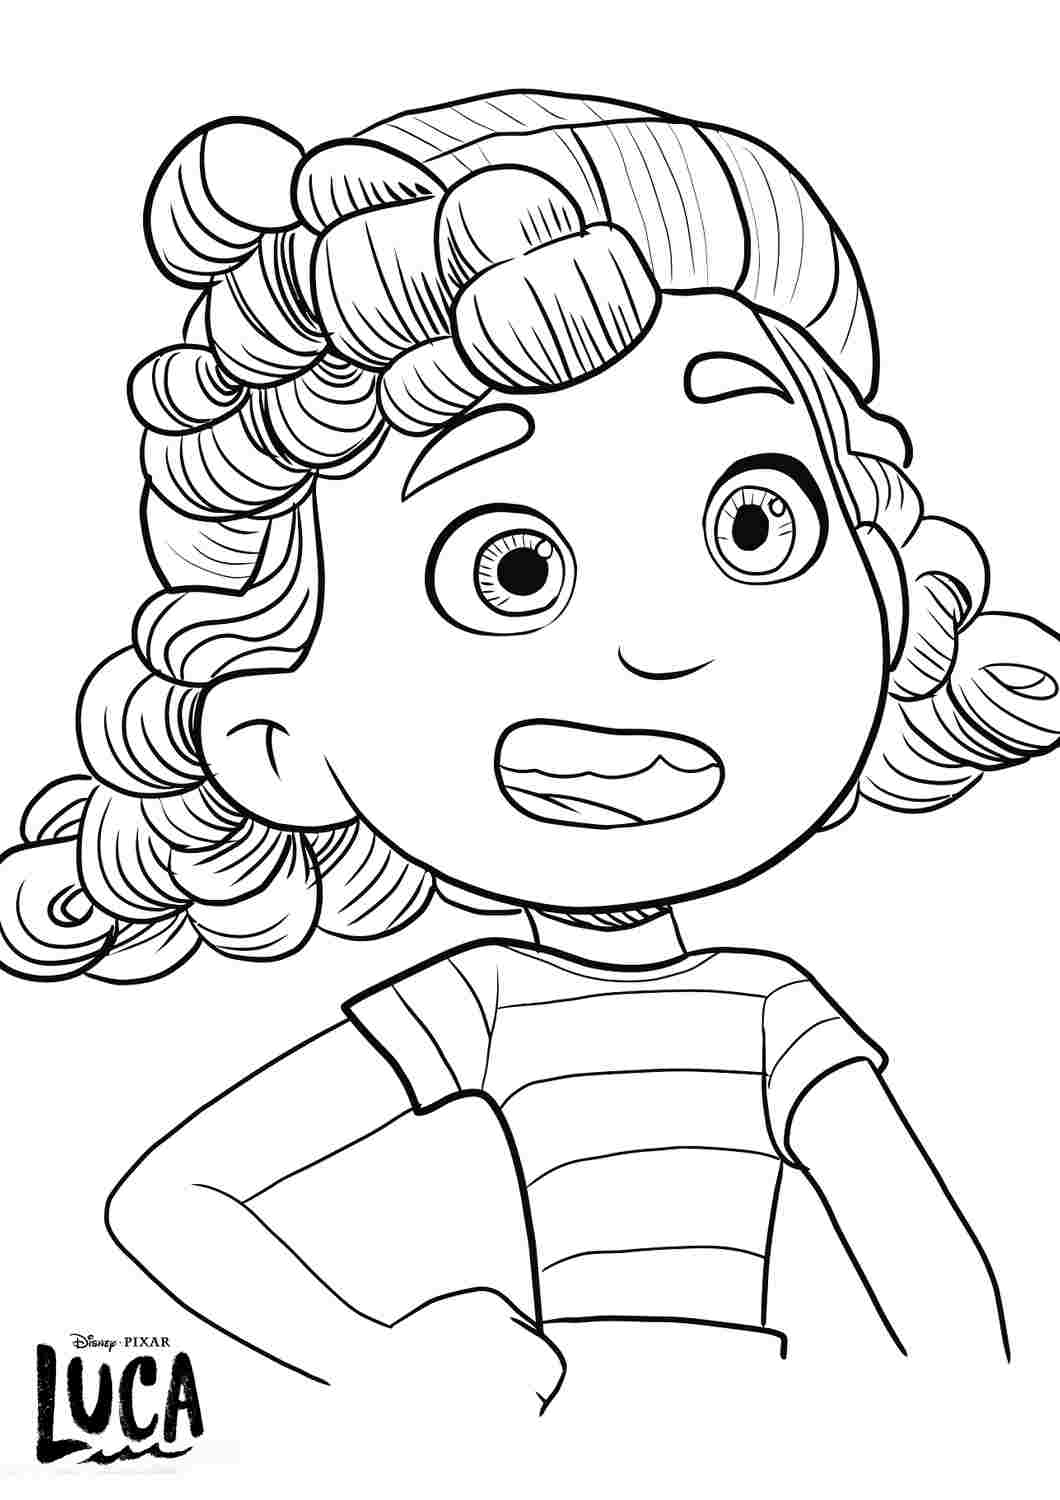 Luca Coloring Pages   Coloring Home